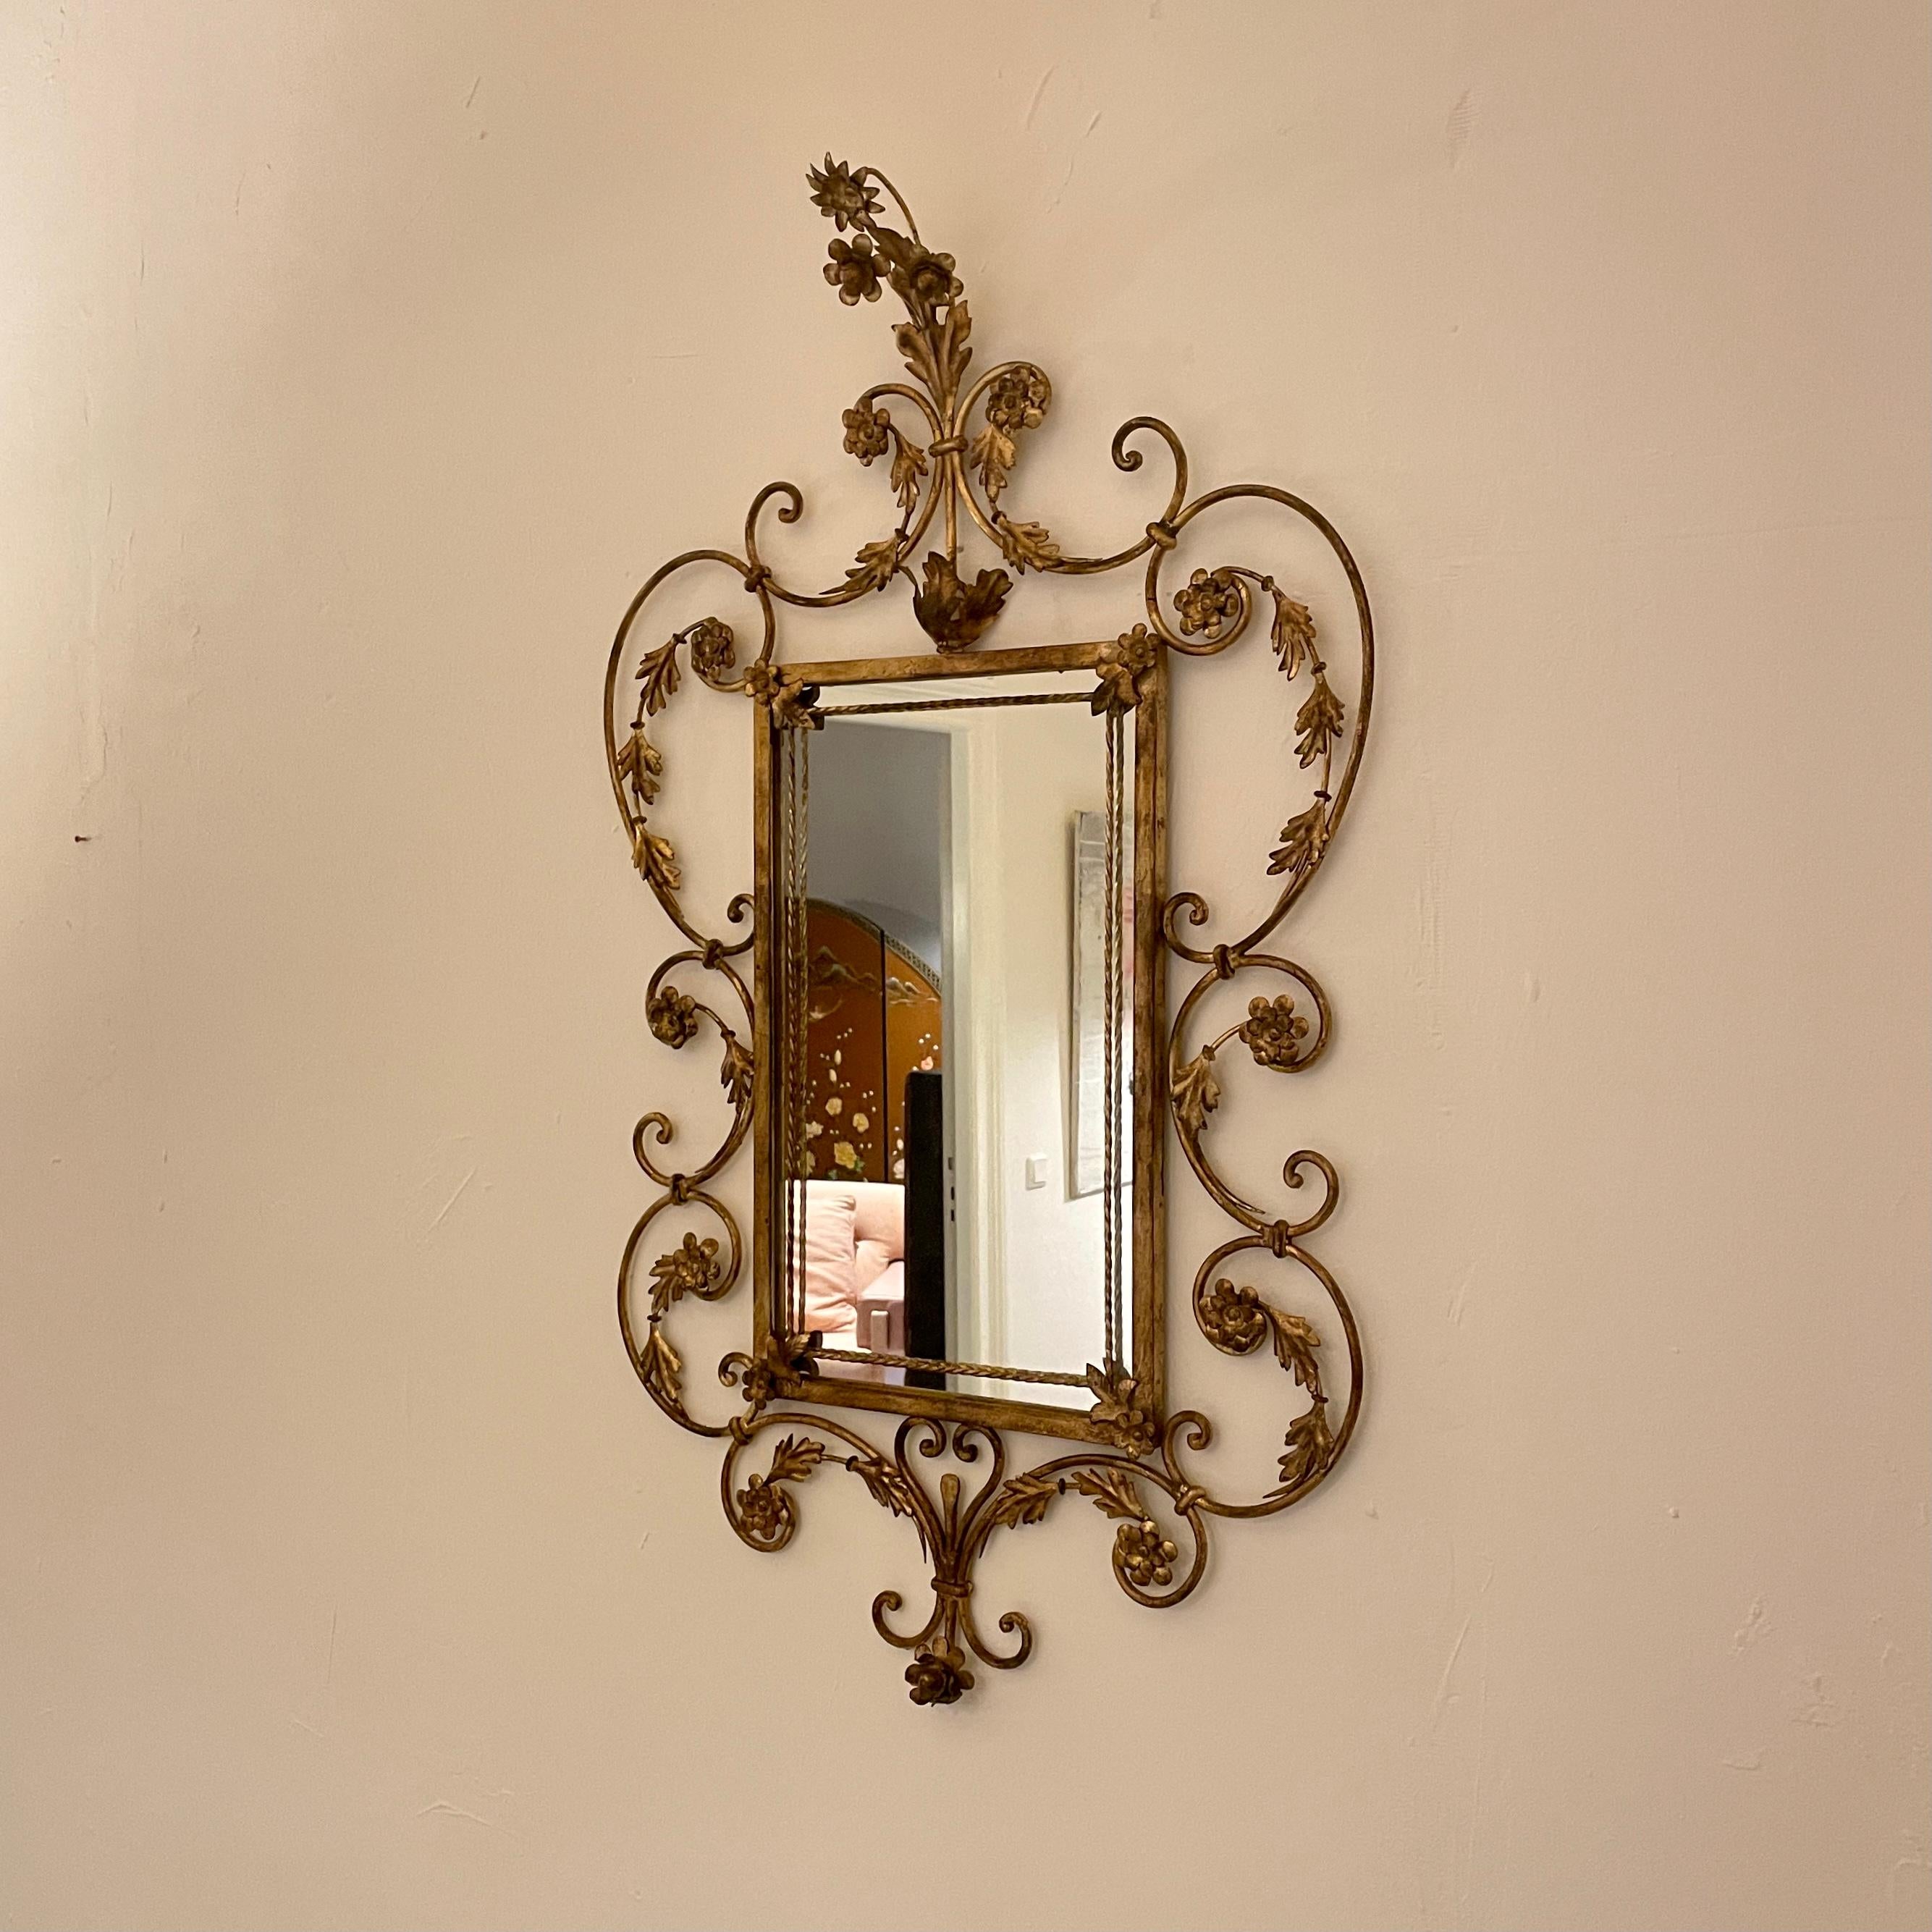 This one of a kind mid century brass floral sculpture mirror by Hans Kögl was made around 1970 for a privat Villa in Bavaria.
He did the whole interior for the house and this is one of the pieces.
The mirror has beautiful detail of flowers and